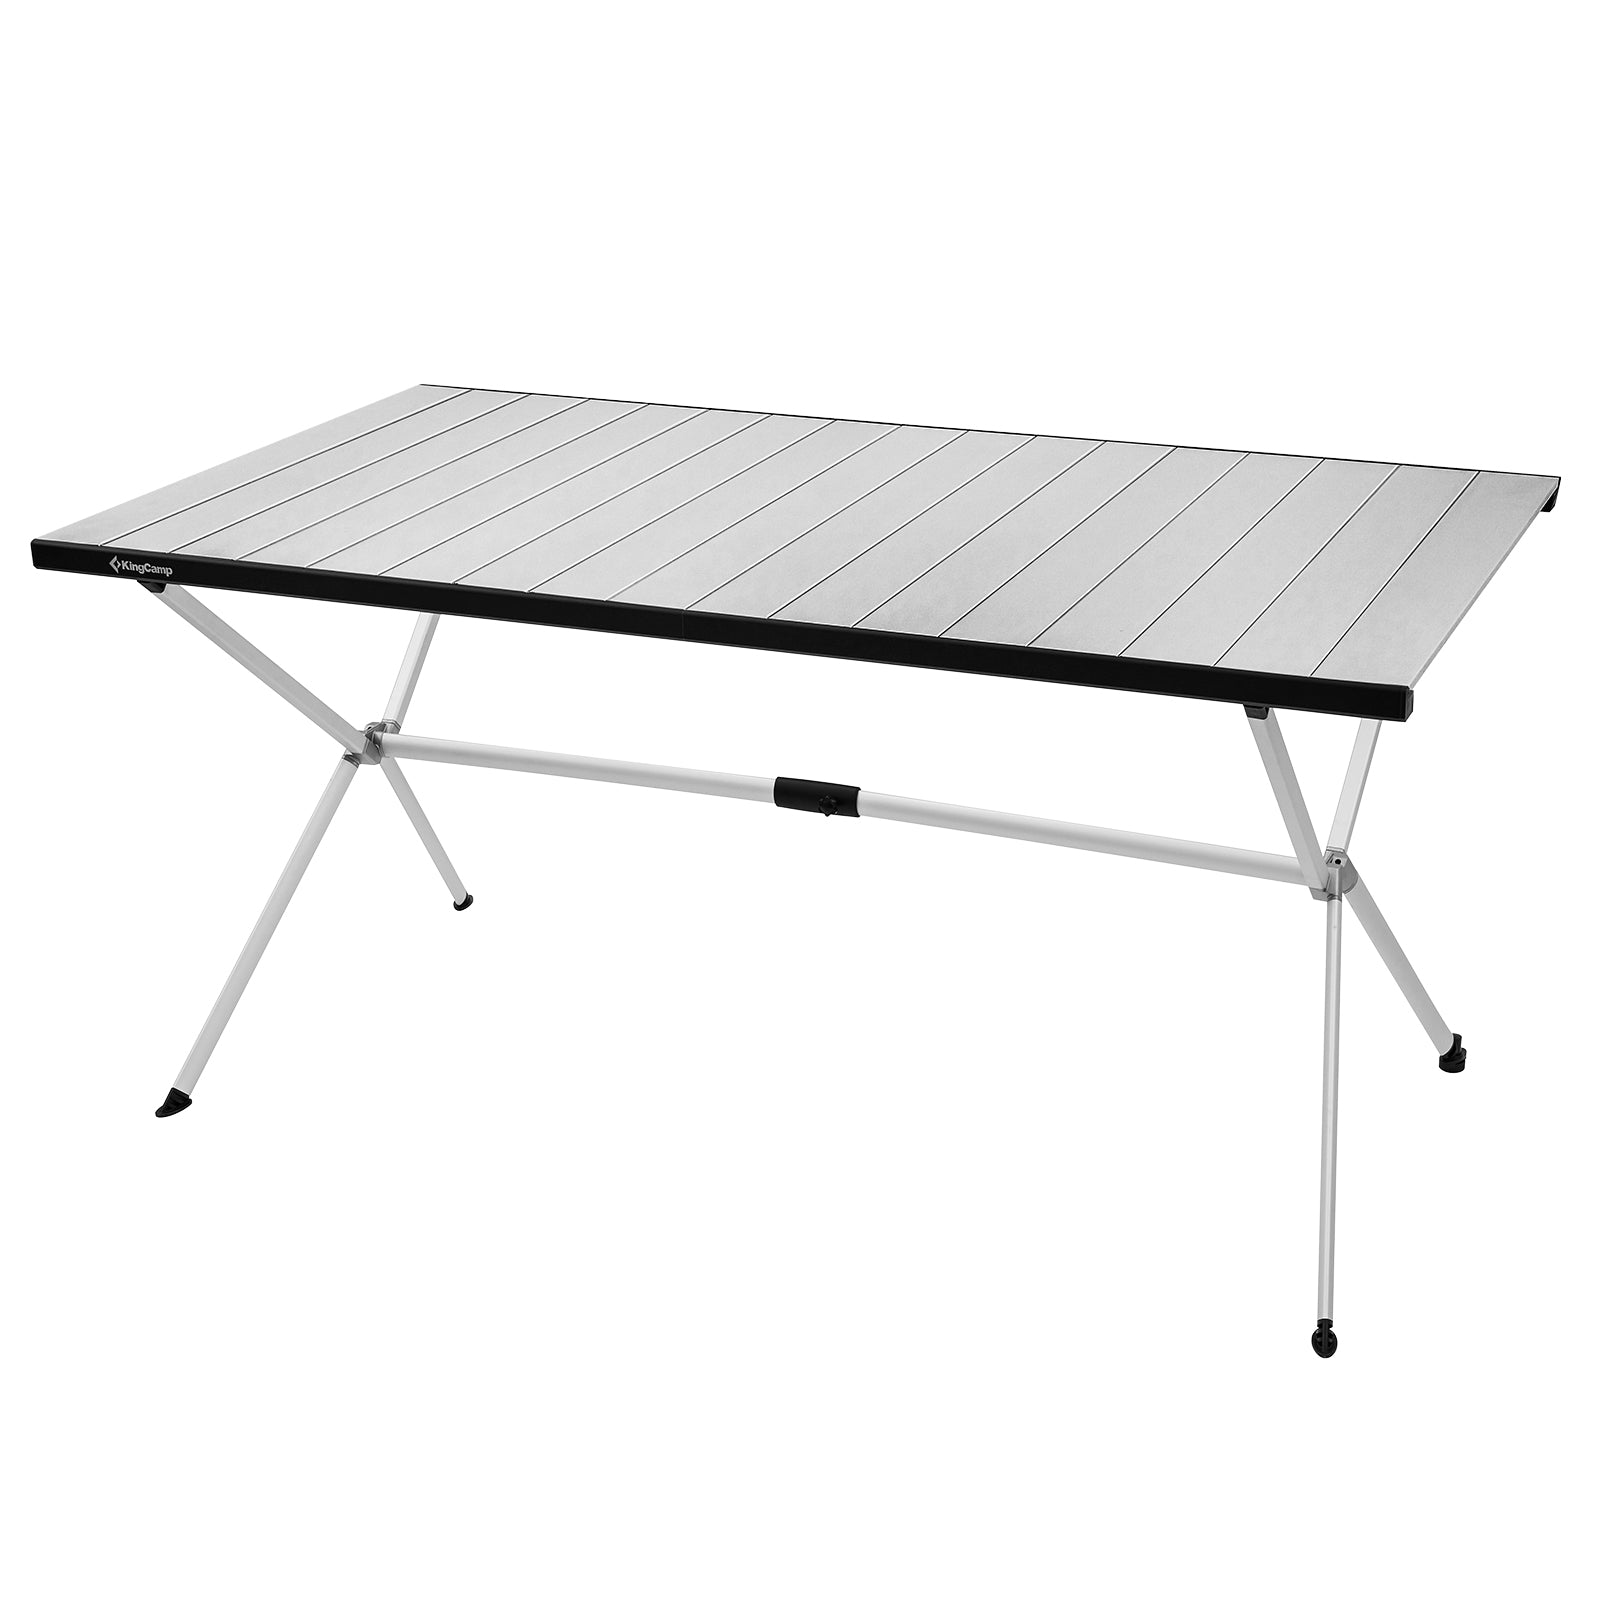 KingCamp Roll Up Folding Camping Table